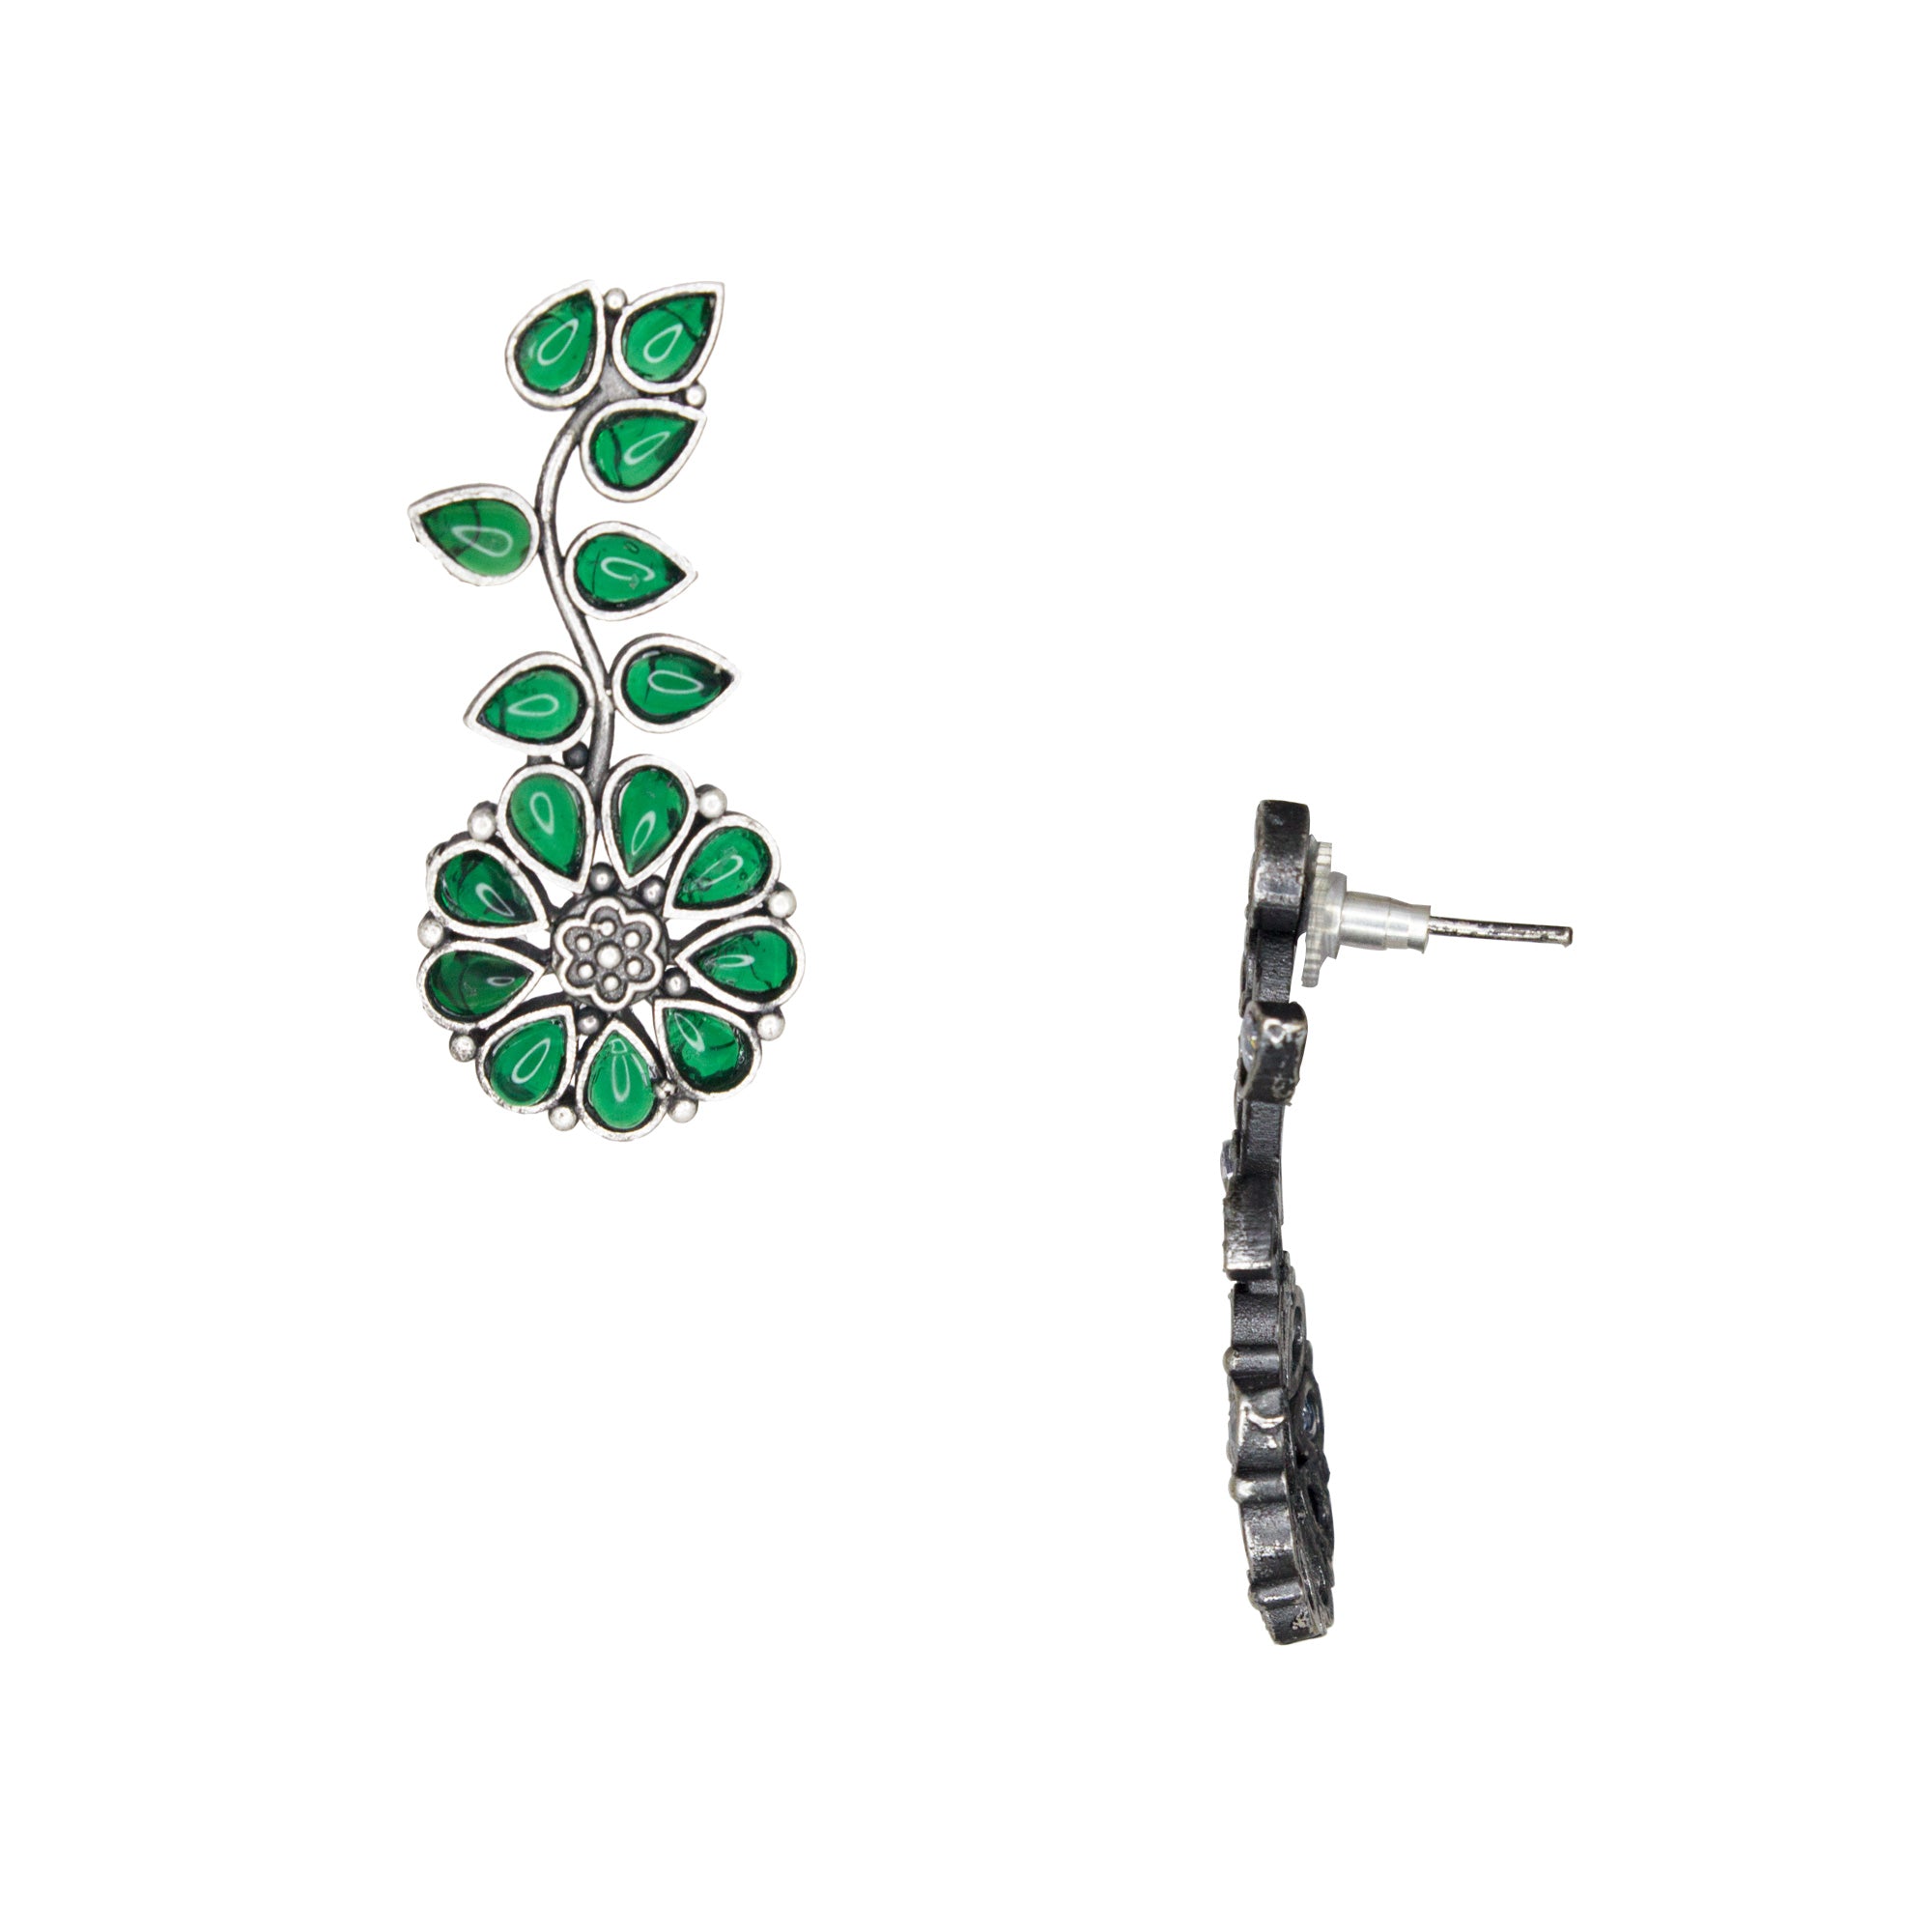 Silver Lookalike Floral Design Green Stones Studded Studs for Women